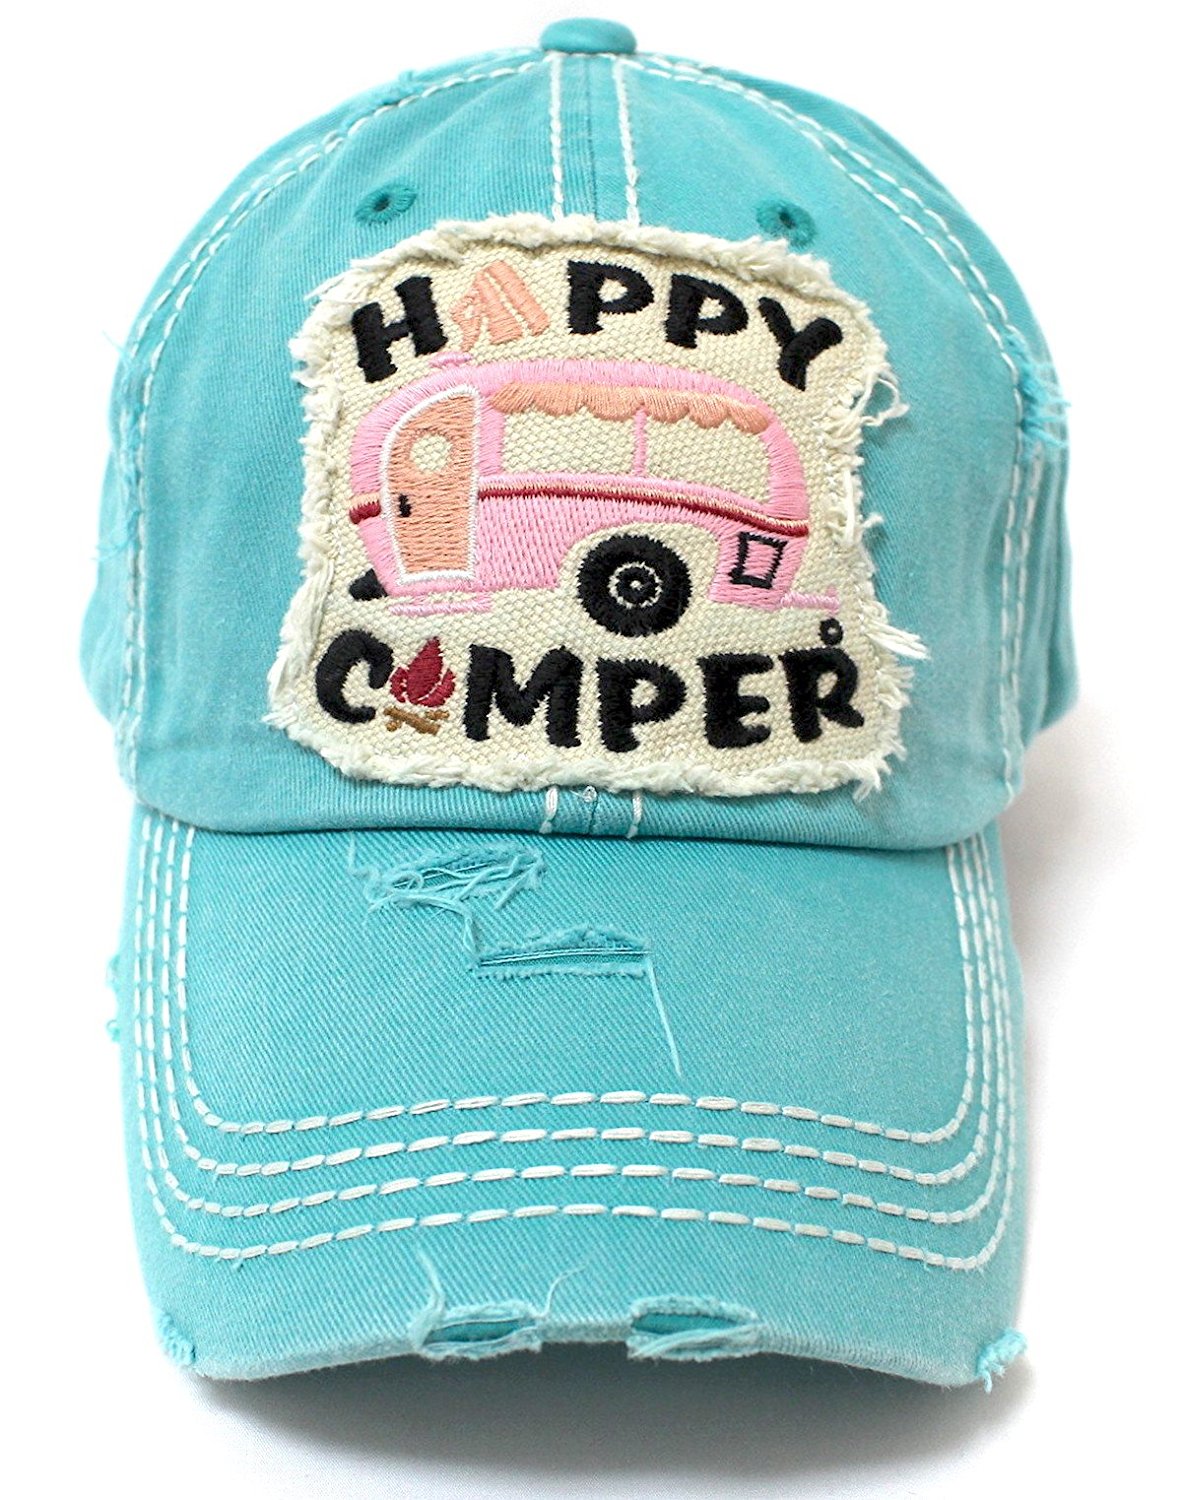 TIFFANY BLUE Happy Camper Camp Fire Patch Embroidery Baseball Hat - Caps 'N Vintage 